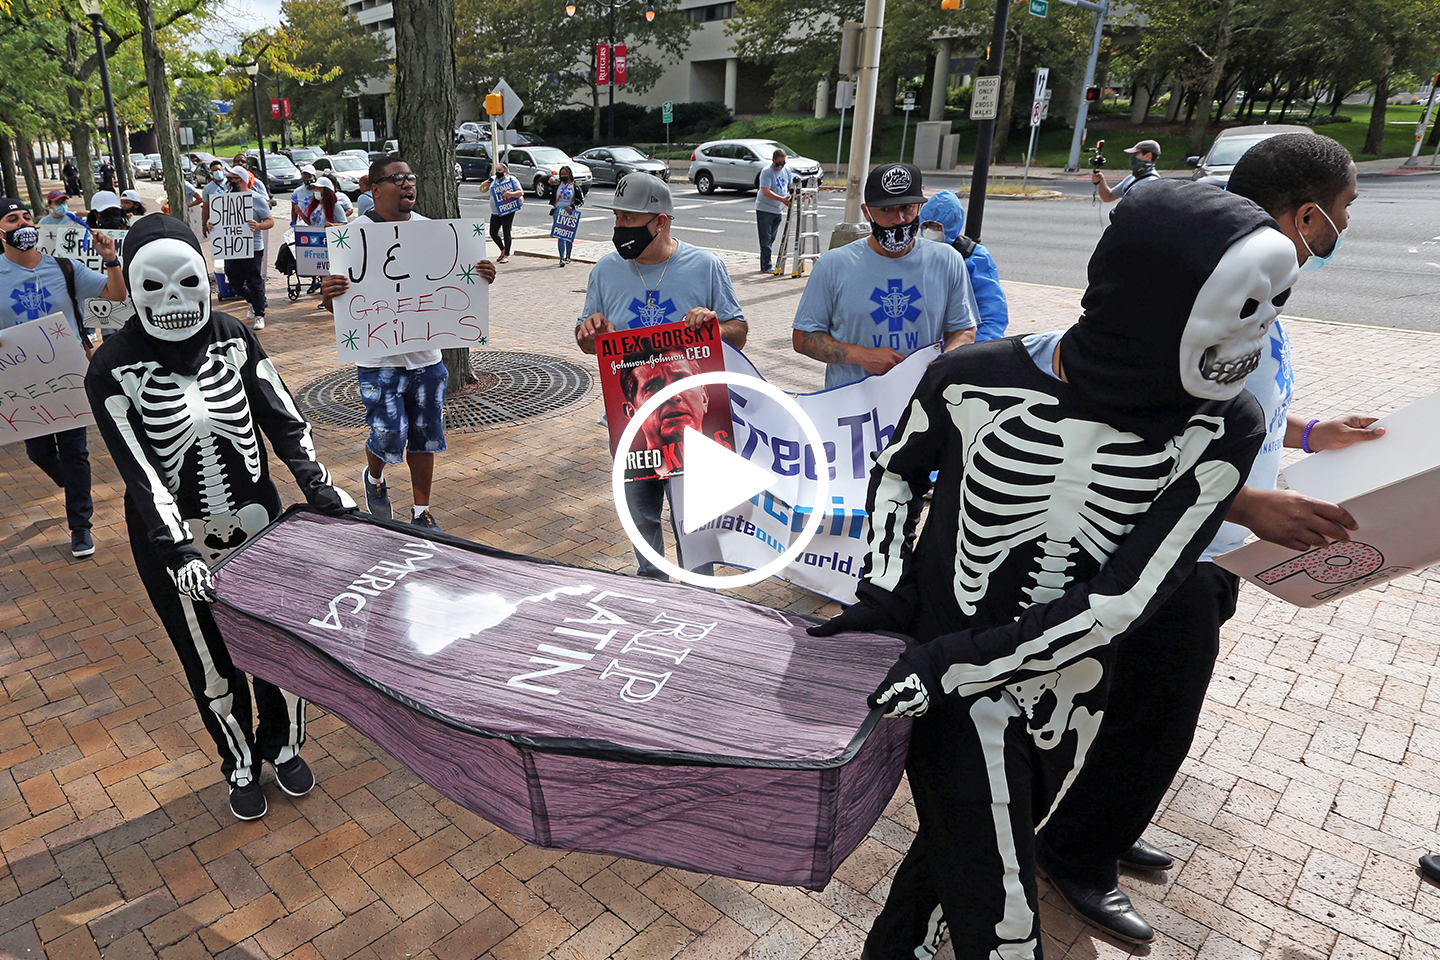 Click the video to watch highlights from the "Vaccinate Our World" protest at Johnson & Johnson's New Jersey headquarters on Sep. 22. Photo: Bruce Gilbert, AP Images